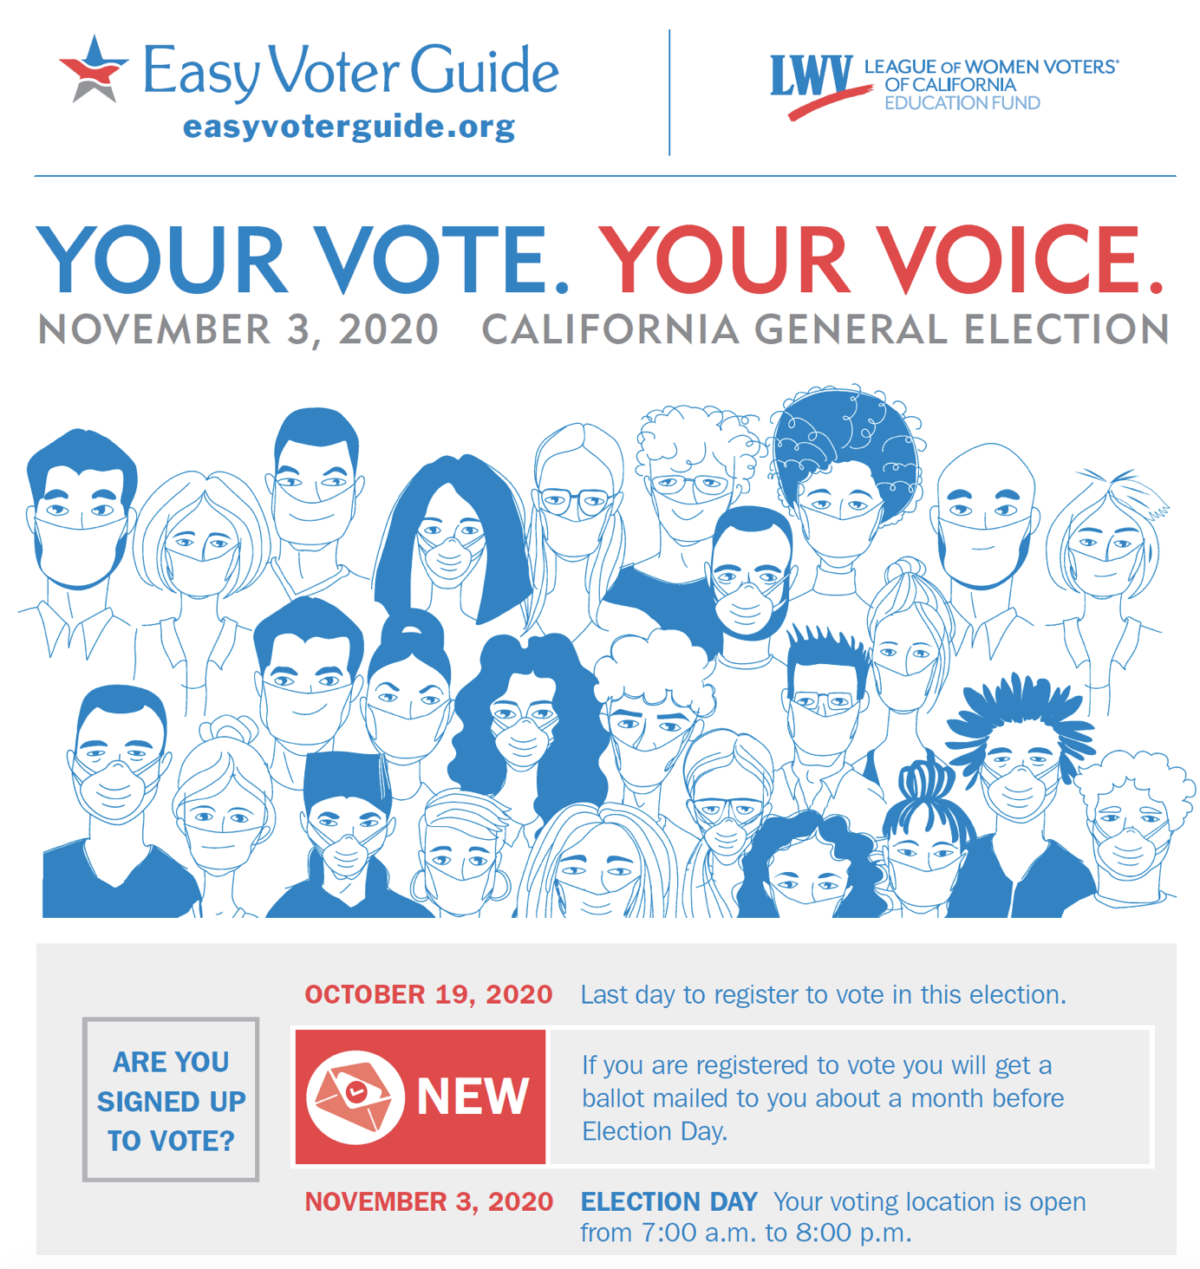 Looking for Information that is Not Partisan? Easy Voter Guides Now Available from the League of Women Voters